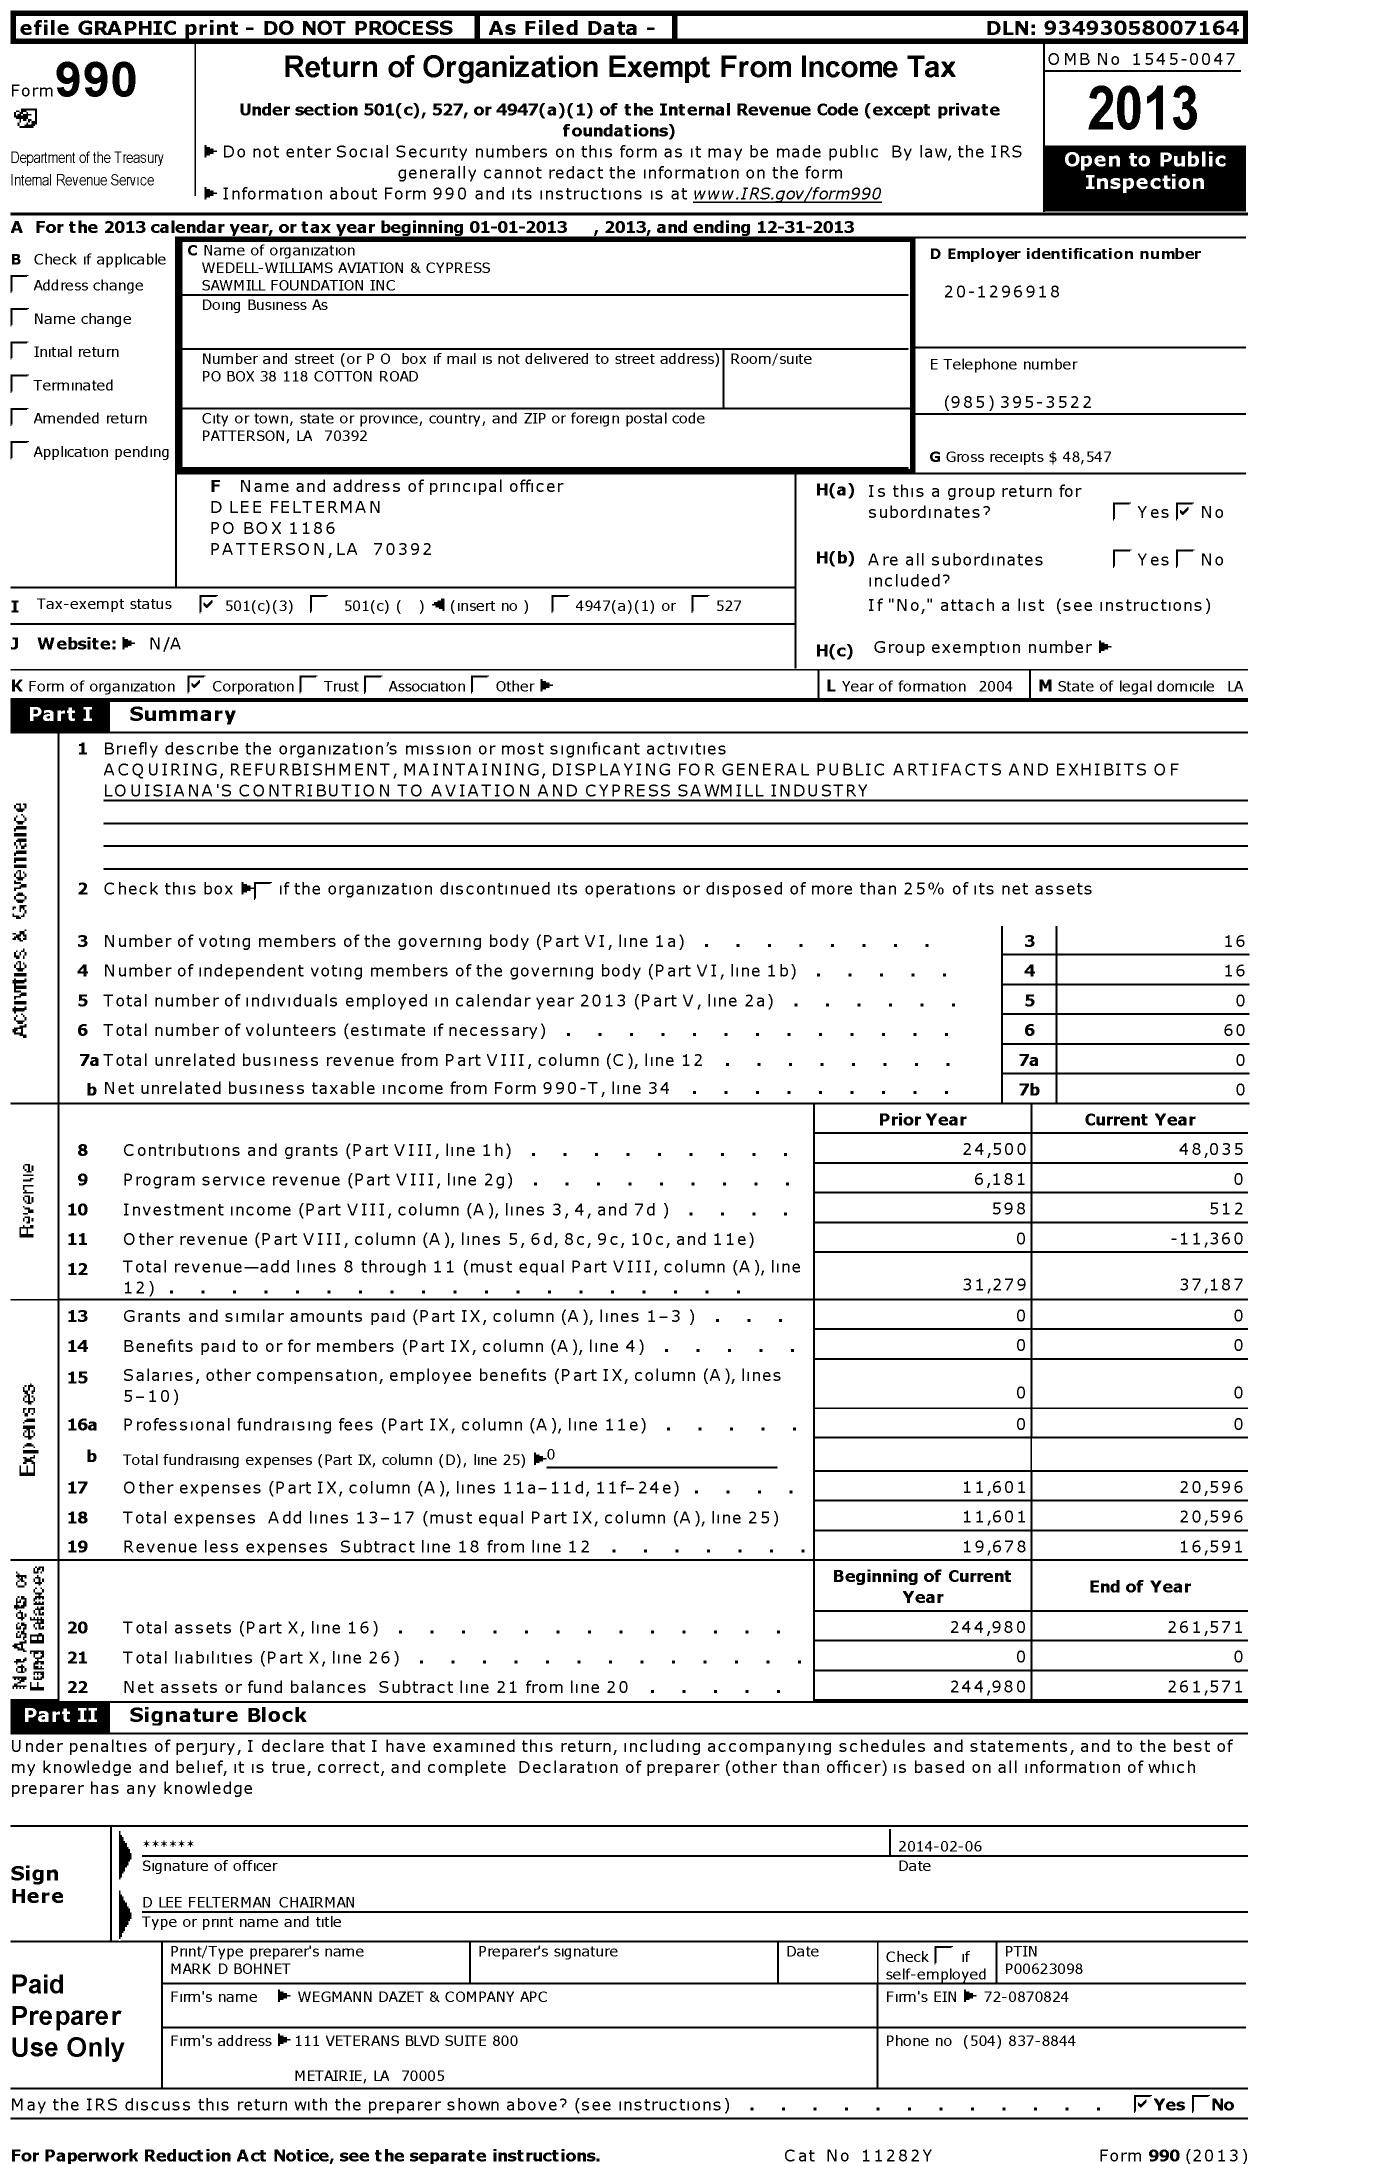 Image of first page of 2013 Form 990 for Wedell-Williams Aviation and Cypress Sawmill Foundation